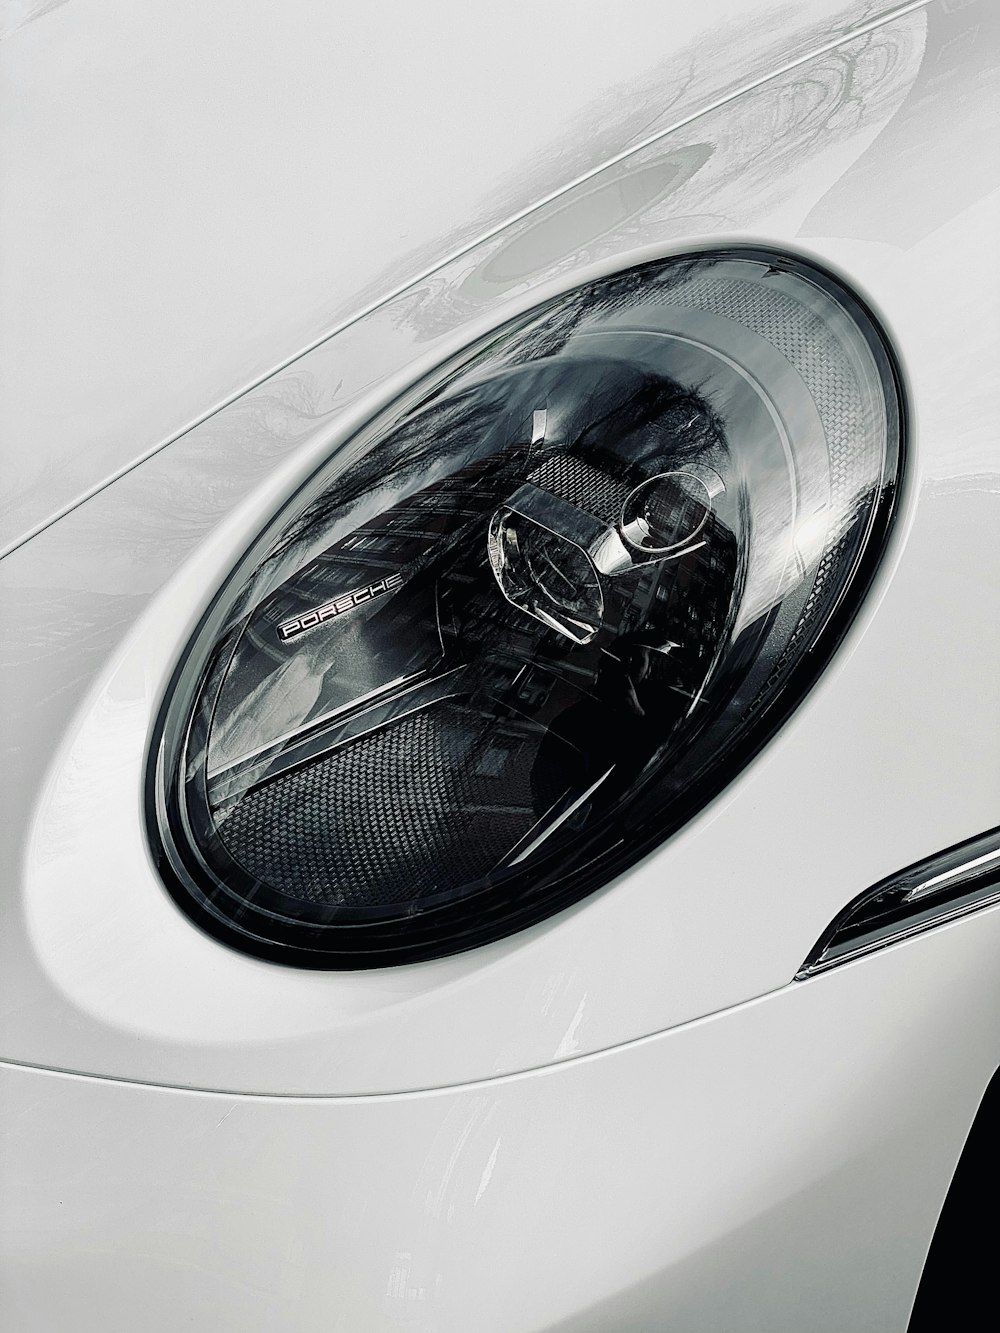 a close up of a white sports car's headlight